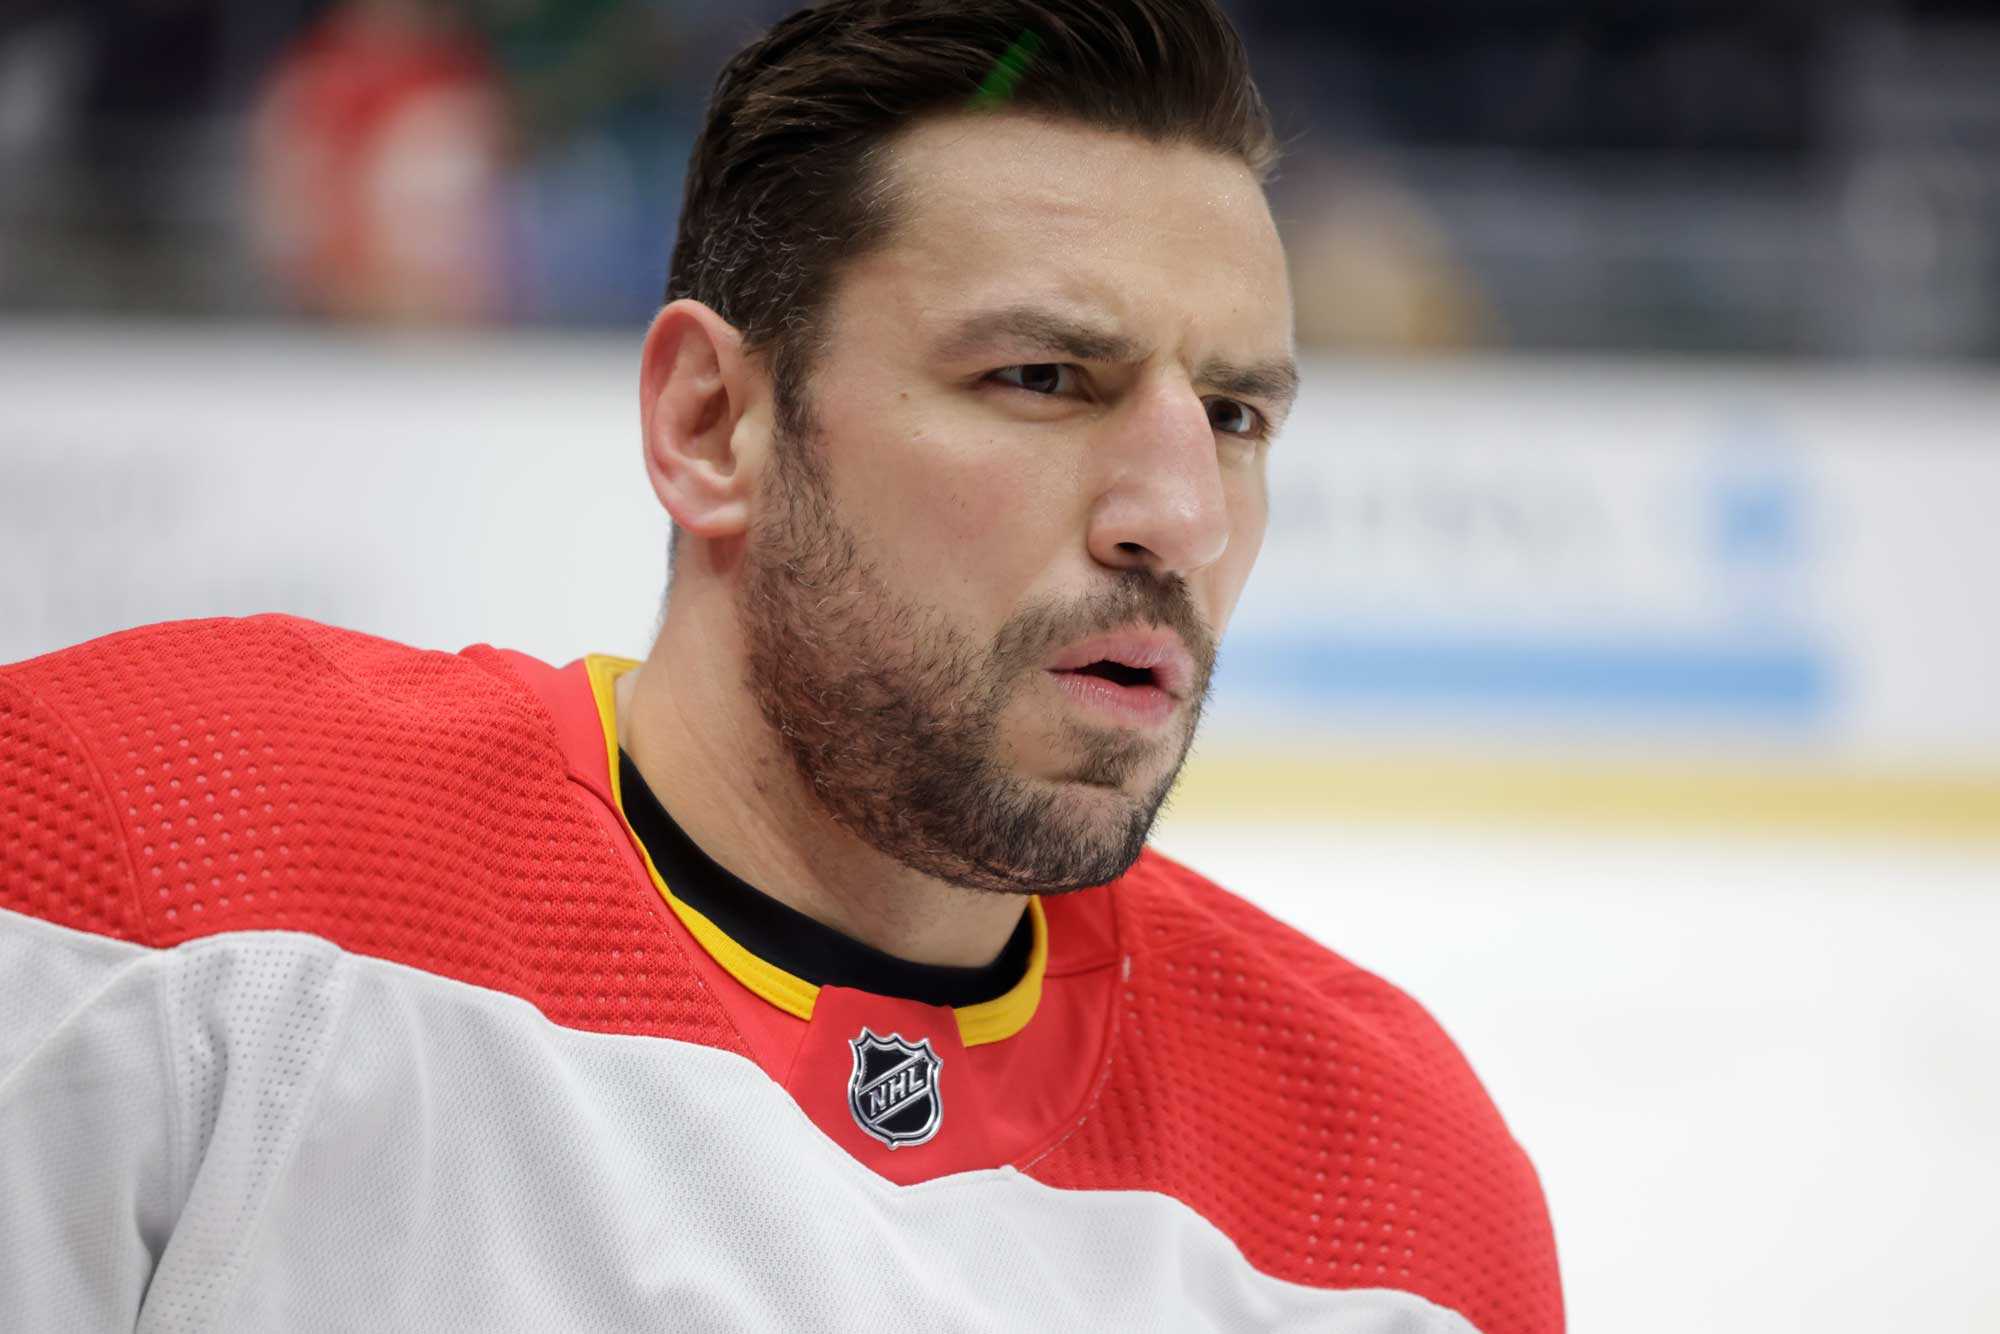 Reports: Milan Lucic may be on his way back to the Bruins